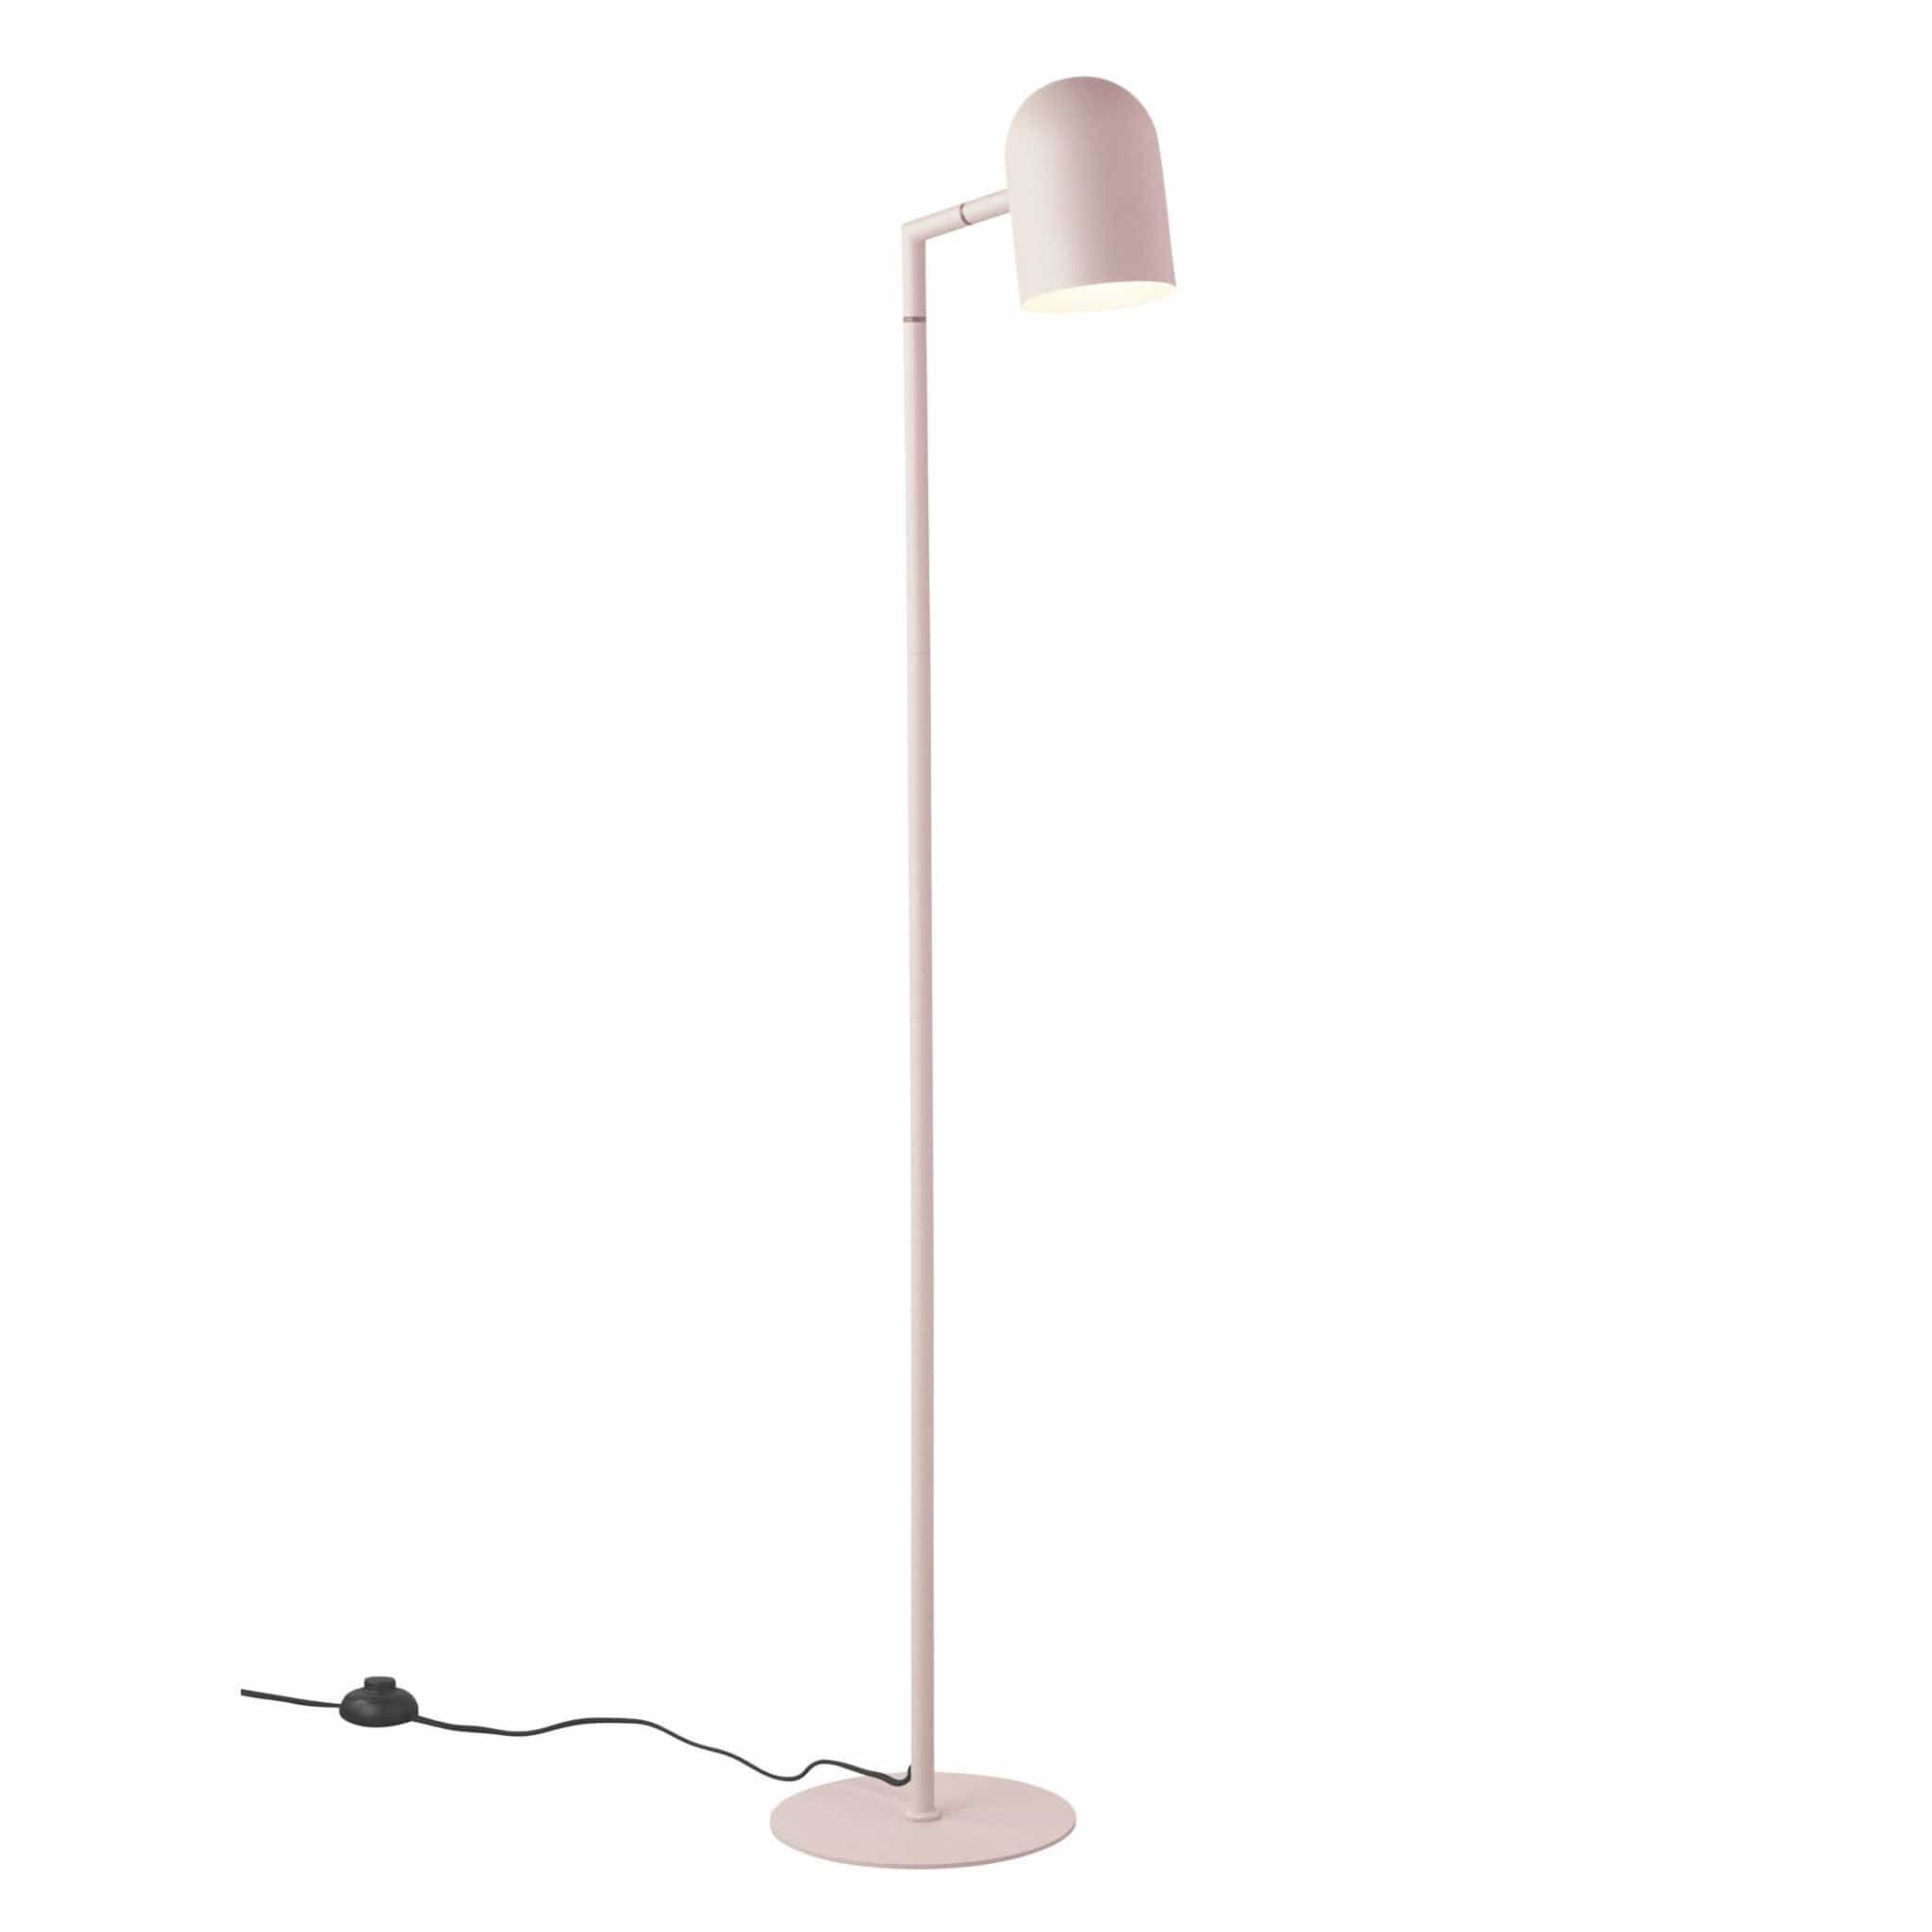 Mayfield Lamps Pia Floor Lamp - Blush (6753646084284)